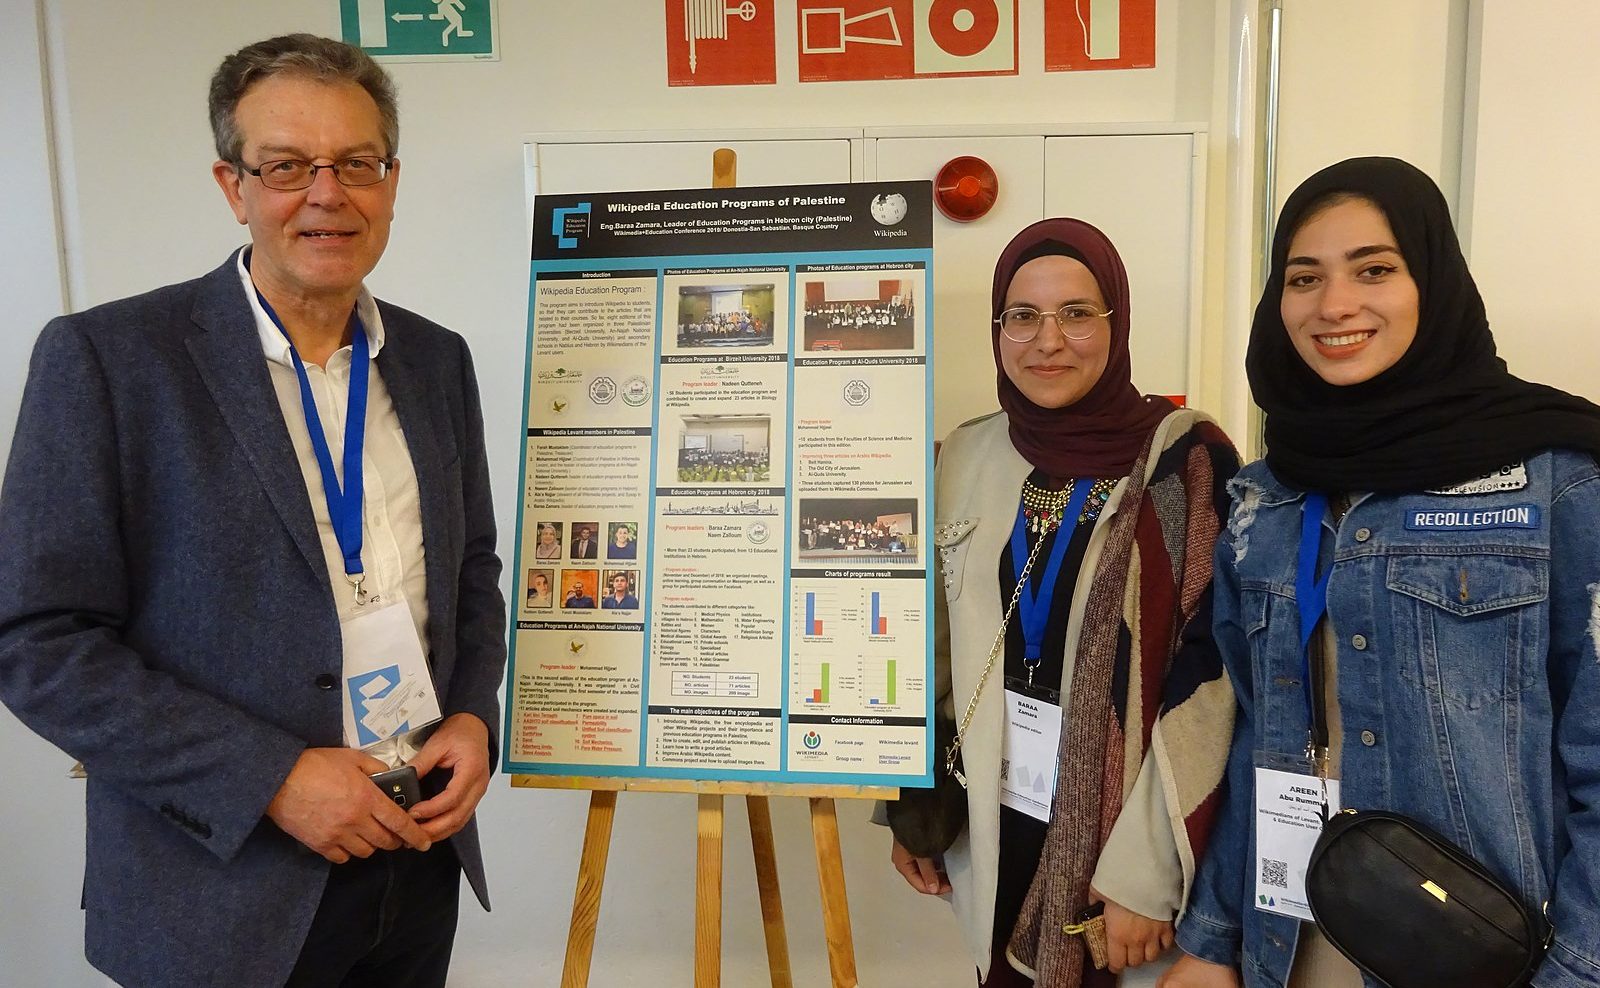 Wikimedians from Wales, Palestine and Jordan at EduWiki Education Conference